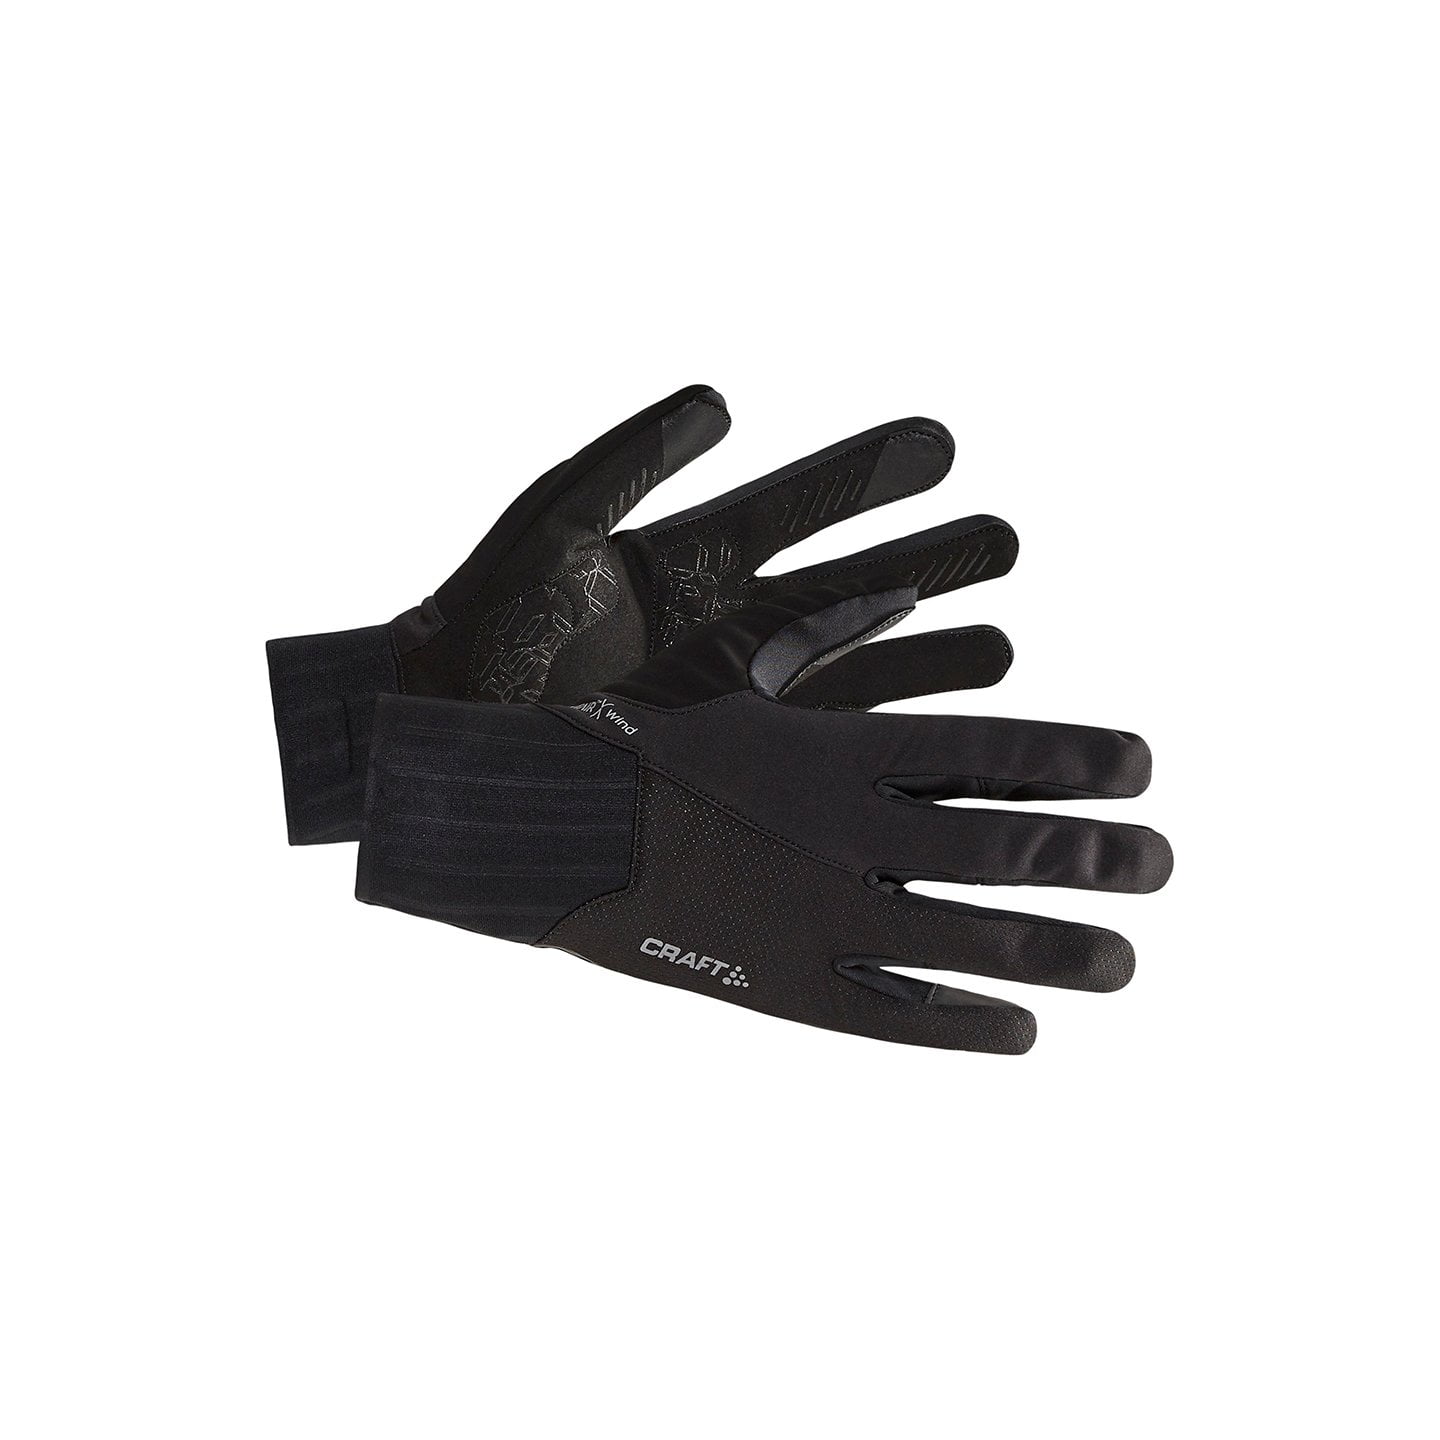 CRAFT Adv SubZ All Weather Winter Gloves Winter Cycling Gloves, for men, size S, Cycling gloves, Cycling clothing